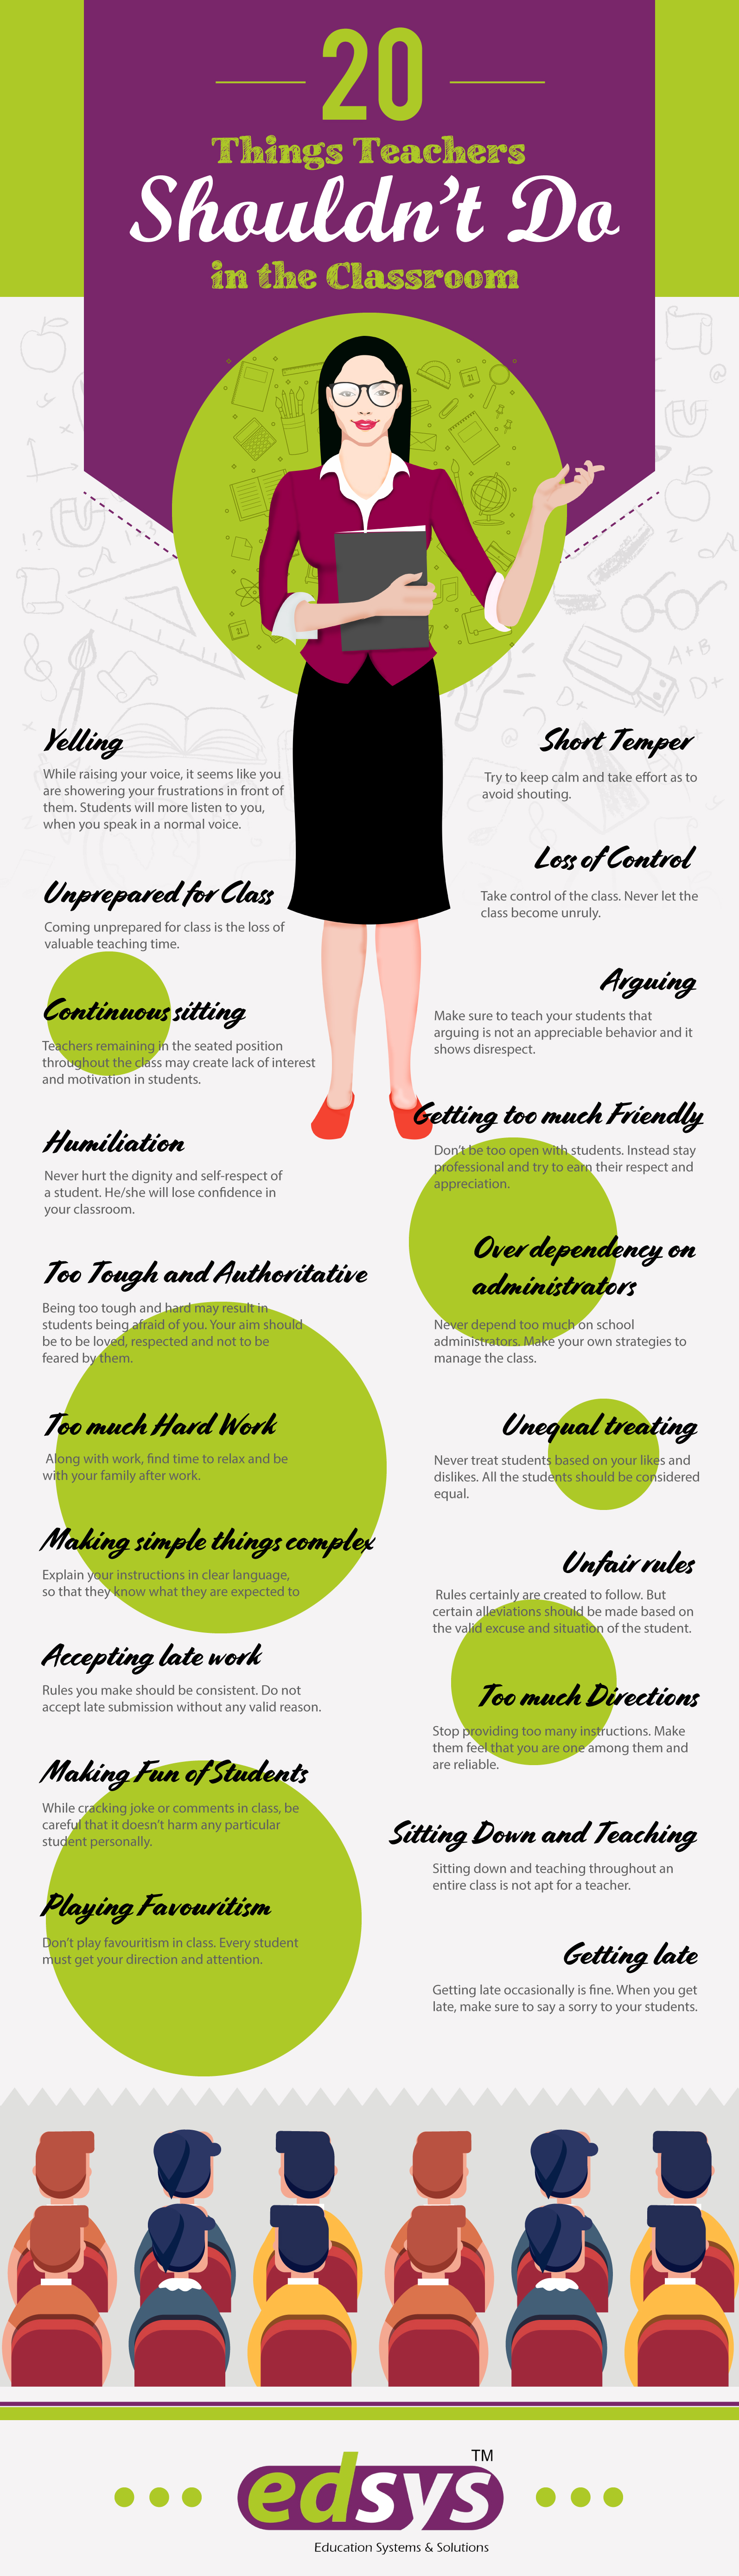 20-Things-Teachers-Shouldnt-Do-in-the-Classroom Infographic